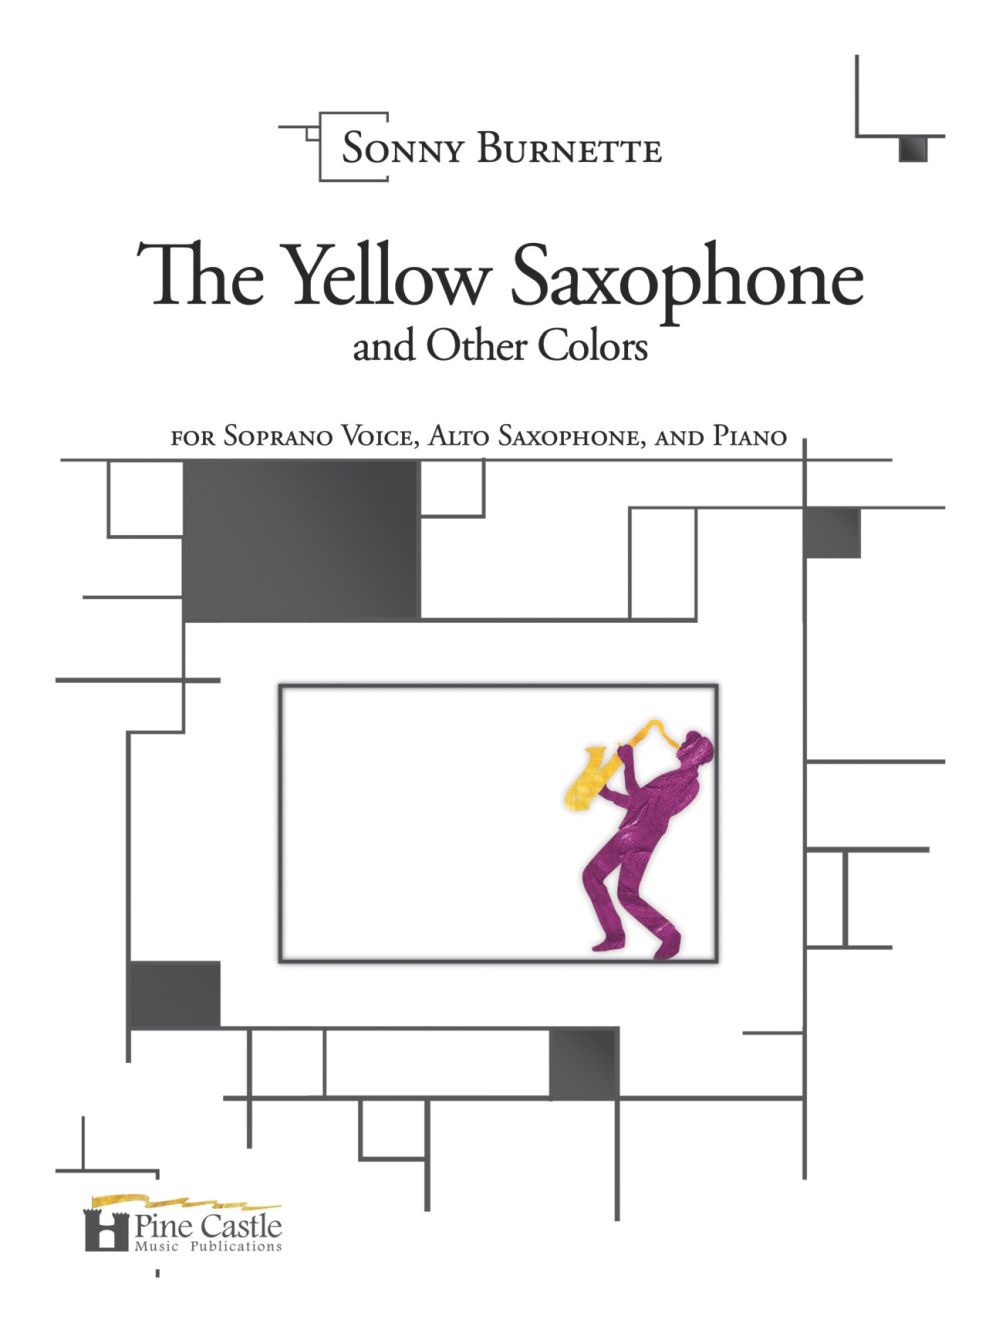 The Yellow Saxophone And Other Colors (BURNETTE SONNY)